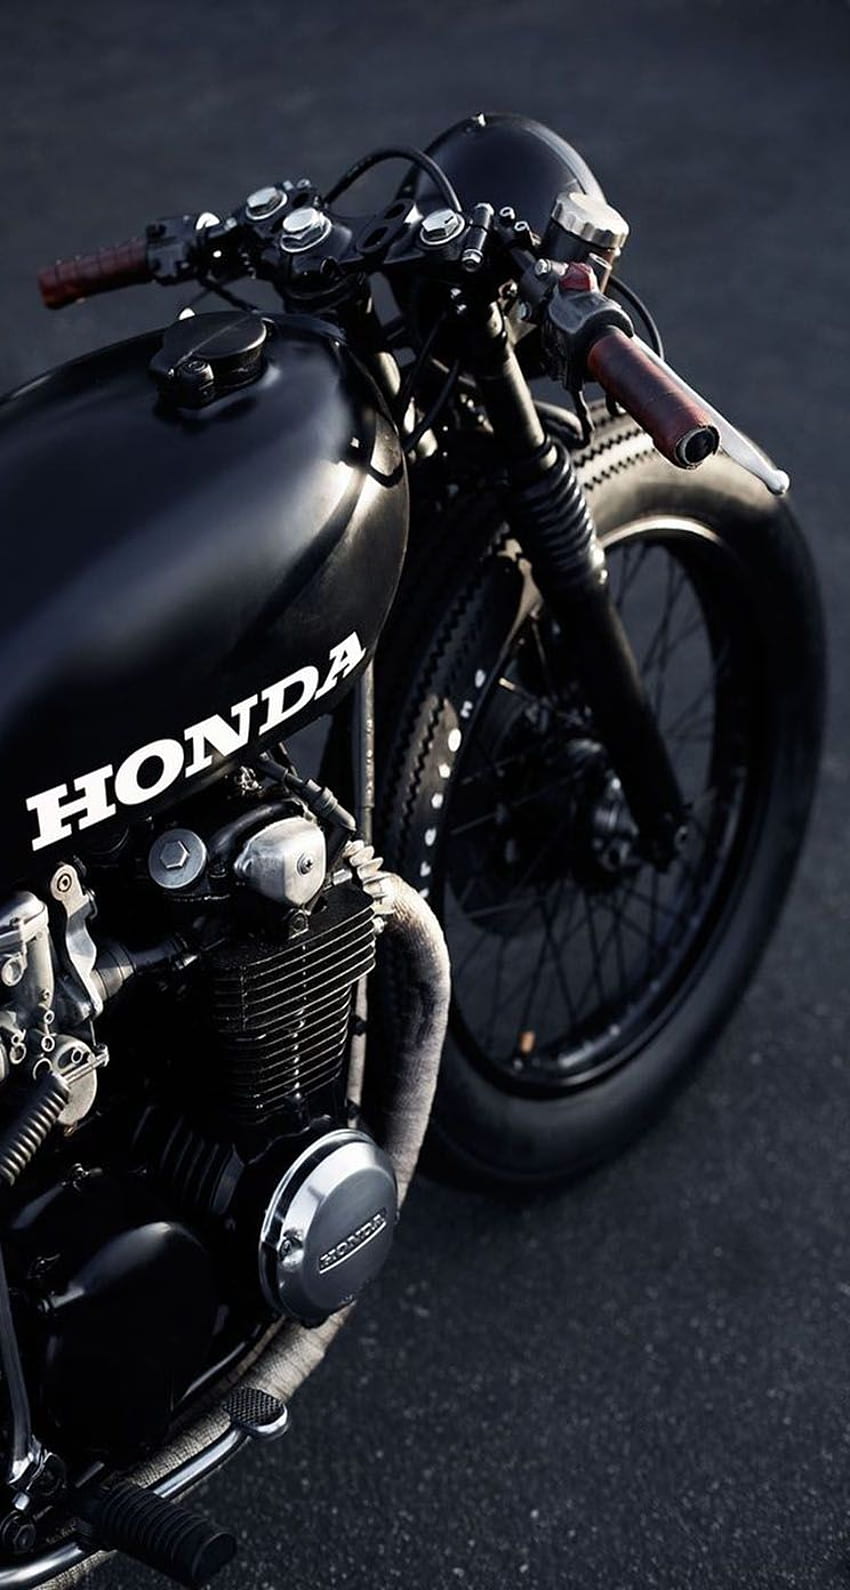 Black Honda cafe racer - The iPhone, Cafe Racer Motorcycle HD phone wallpaper